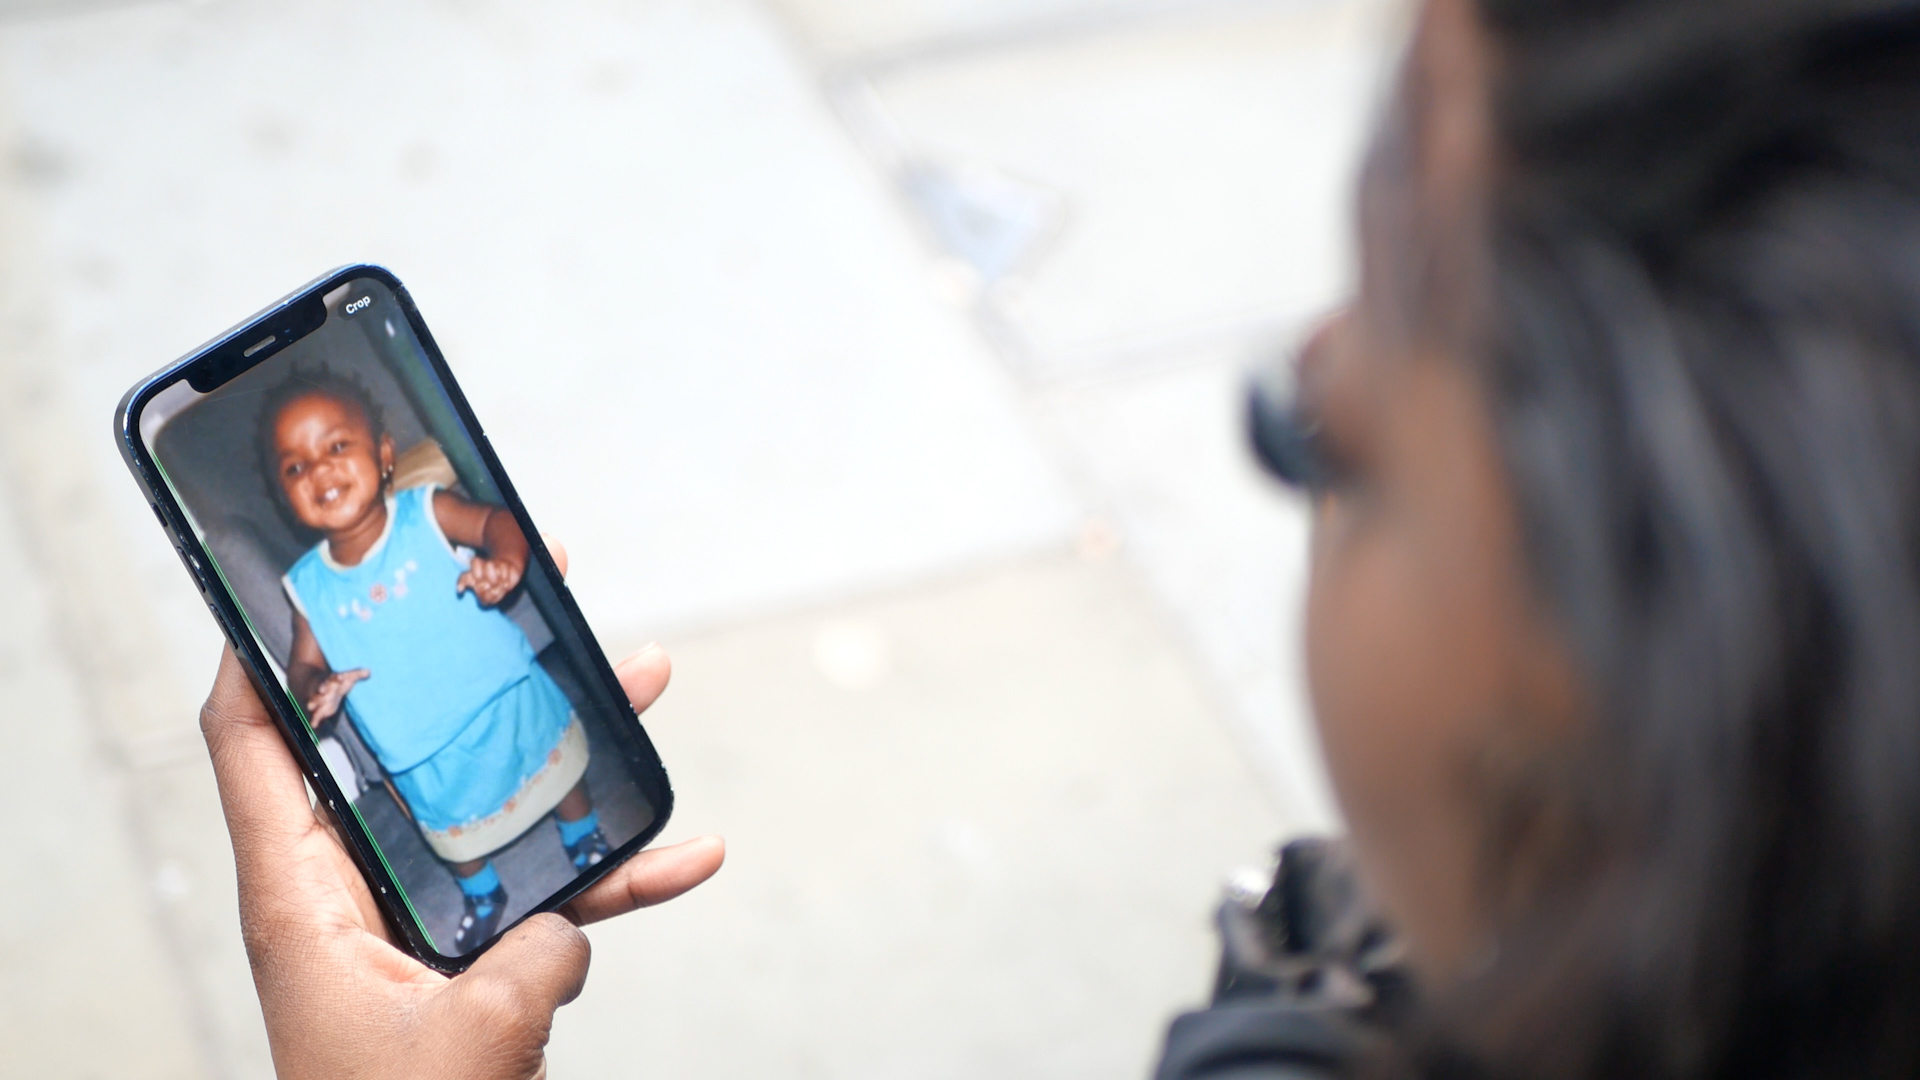 Toyin Odumala, who was abandoned as a baby, looks at a photo of herself as a child on a phone. In the photo the baby is smiling wearing a blue baby outfit. 